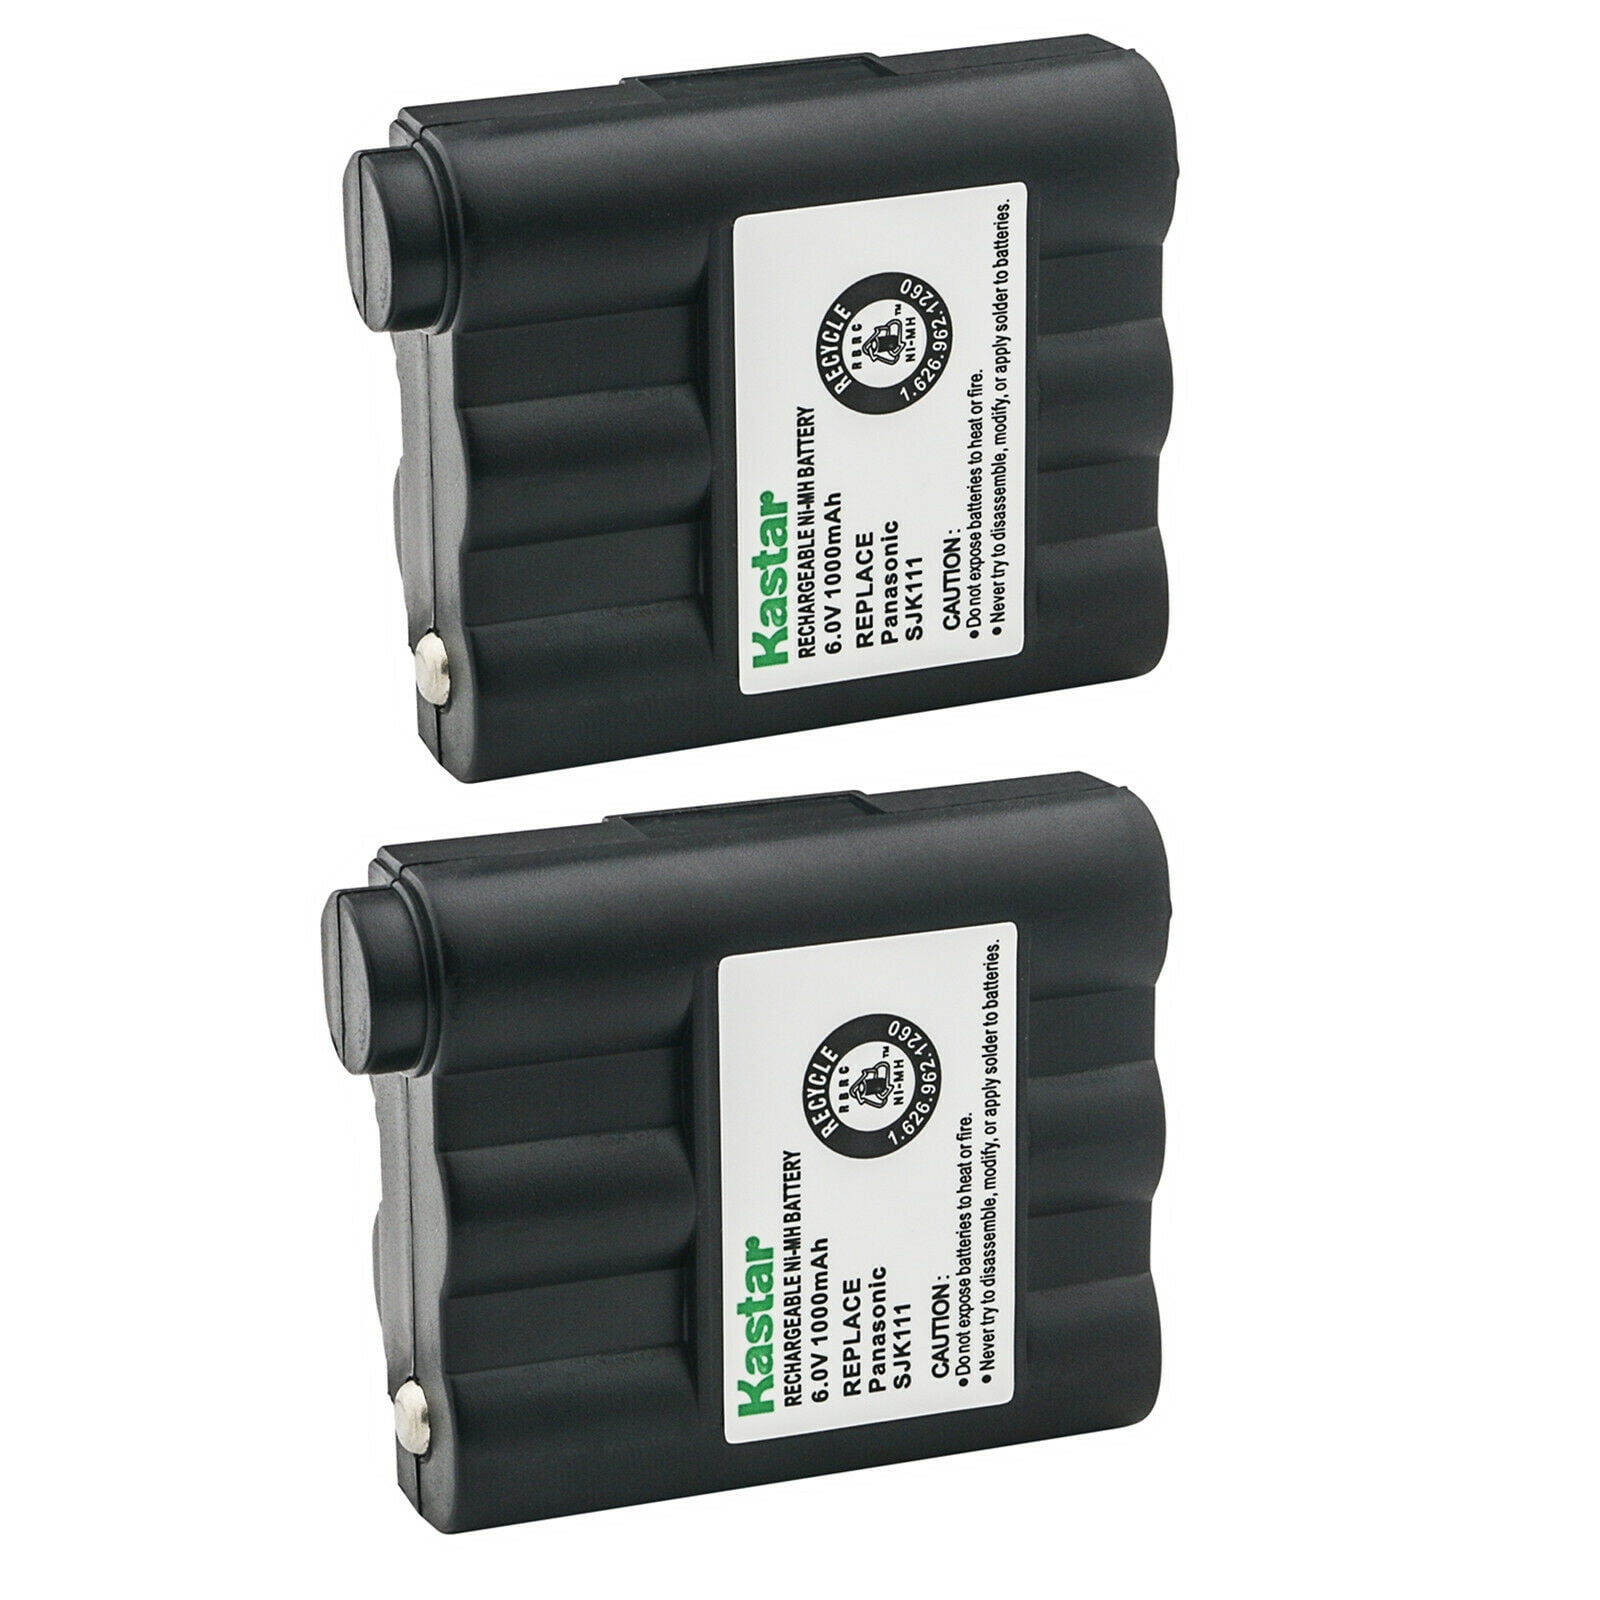 Kastar 6-Pack Two-Way Radio Battery Ni-MH 6V 1000mAh Replacement for Midland GXT-895VP4 GXT1000VP4 GXT-1050VP4 GXT850VP4 GXT860VP4 GXT1050VP4 LXT-210 GXT800VP4 LXT-303 GXT895VP4 GXT-1000VP4 